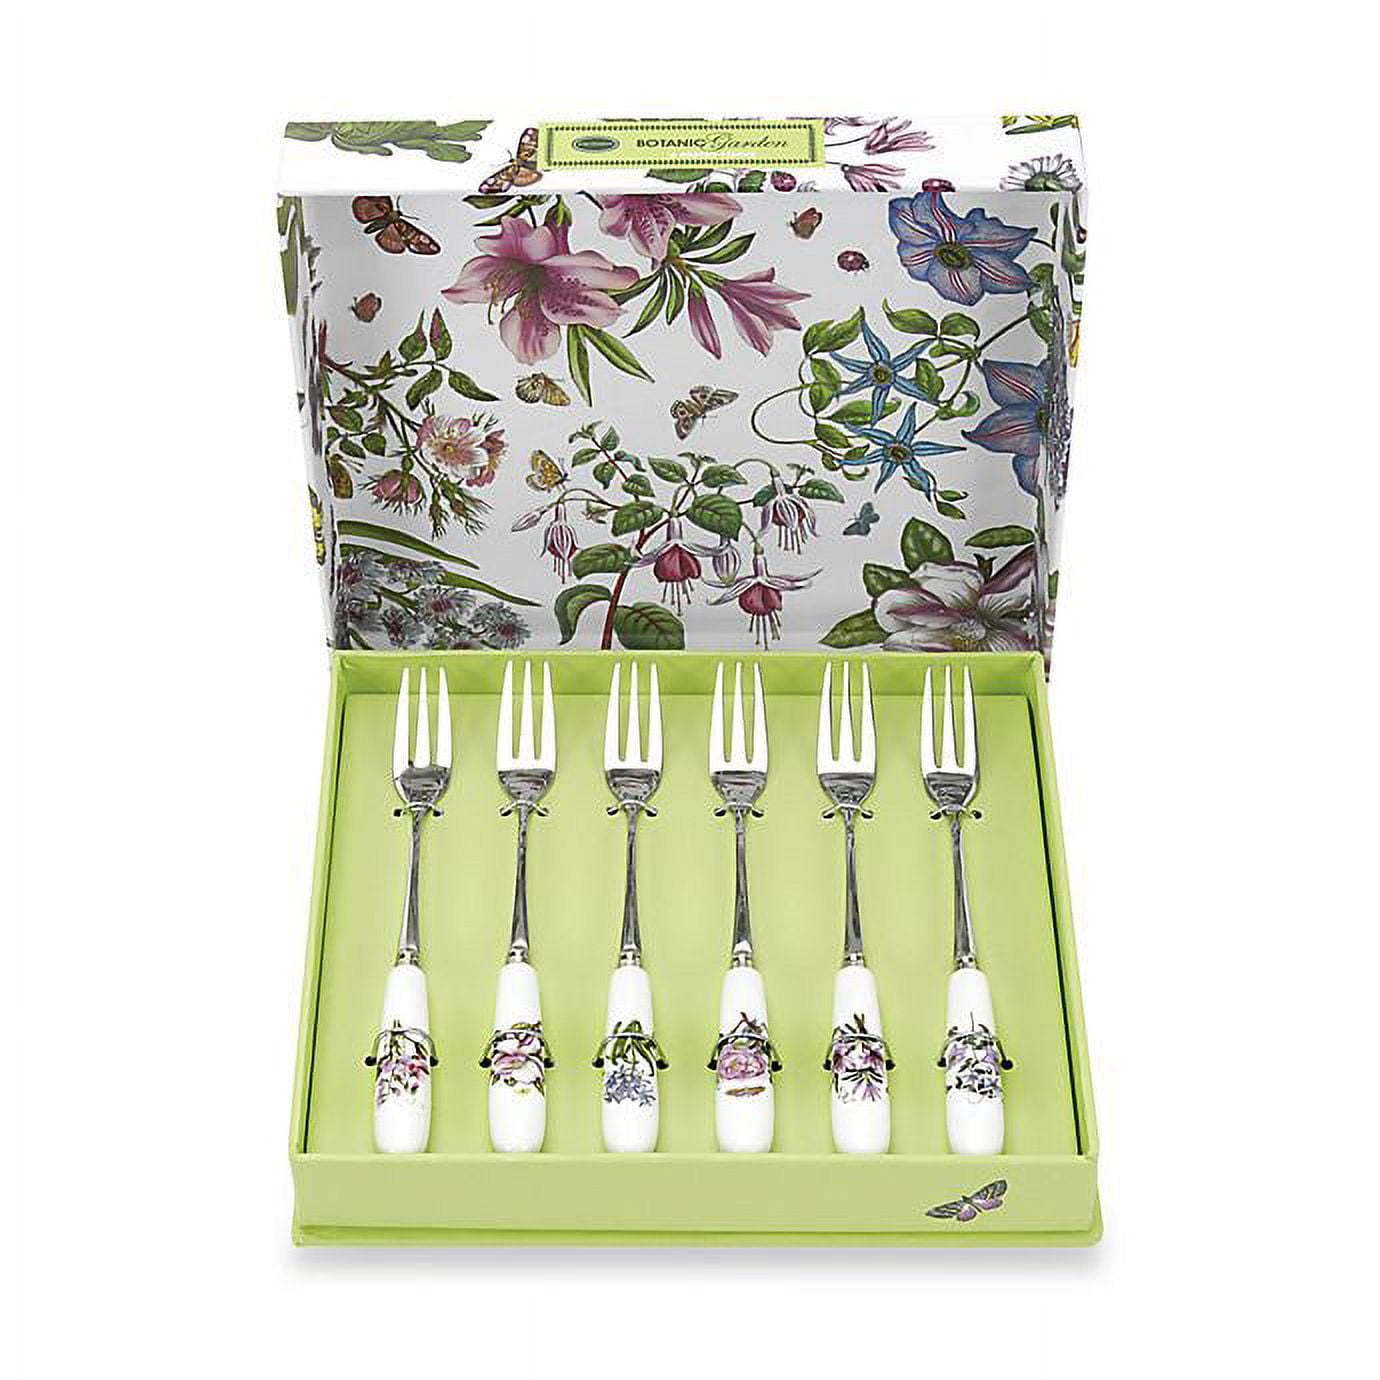 Viners Select 4-Piece 18.0 Gray Pastry Fork Set